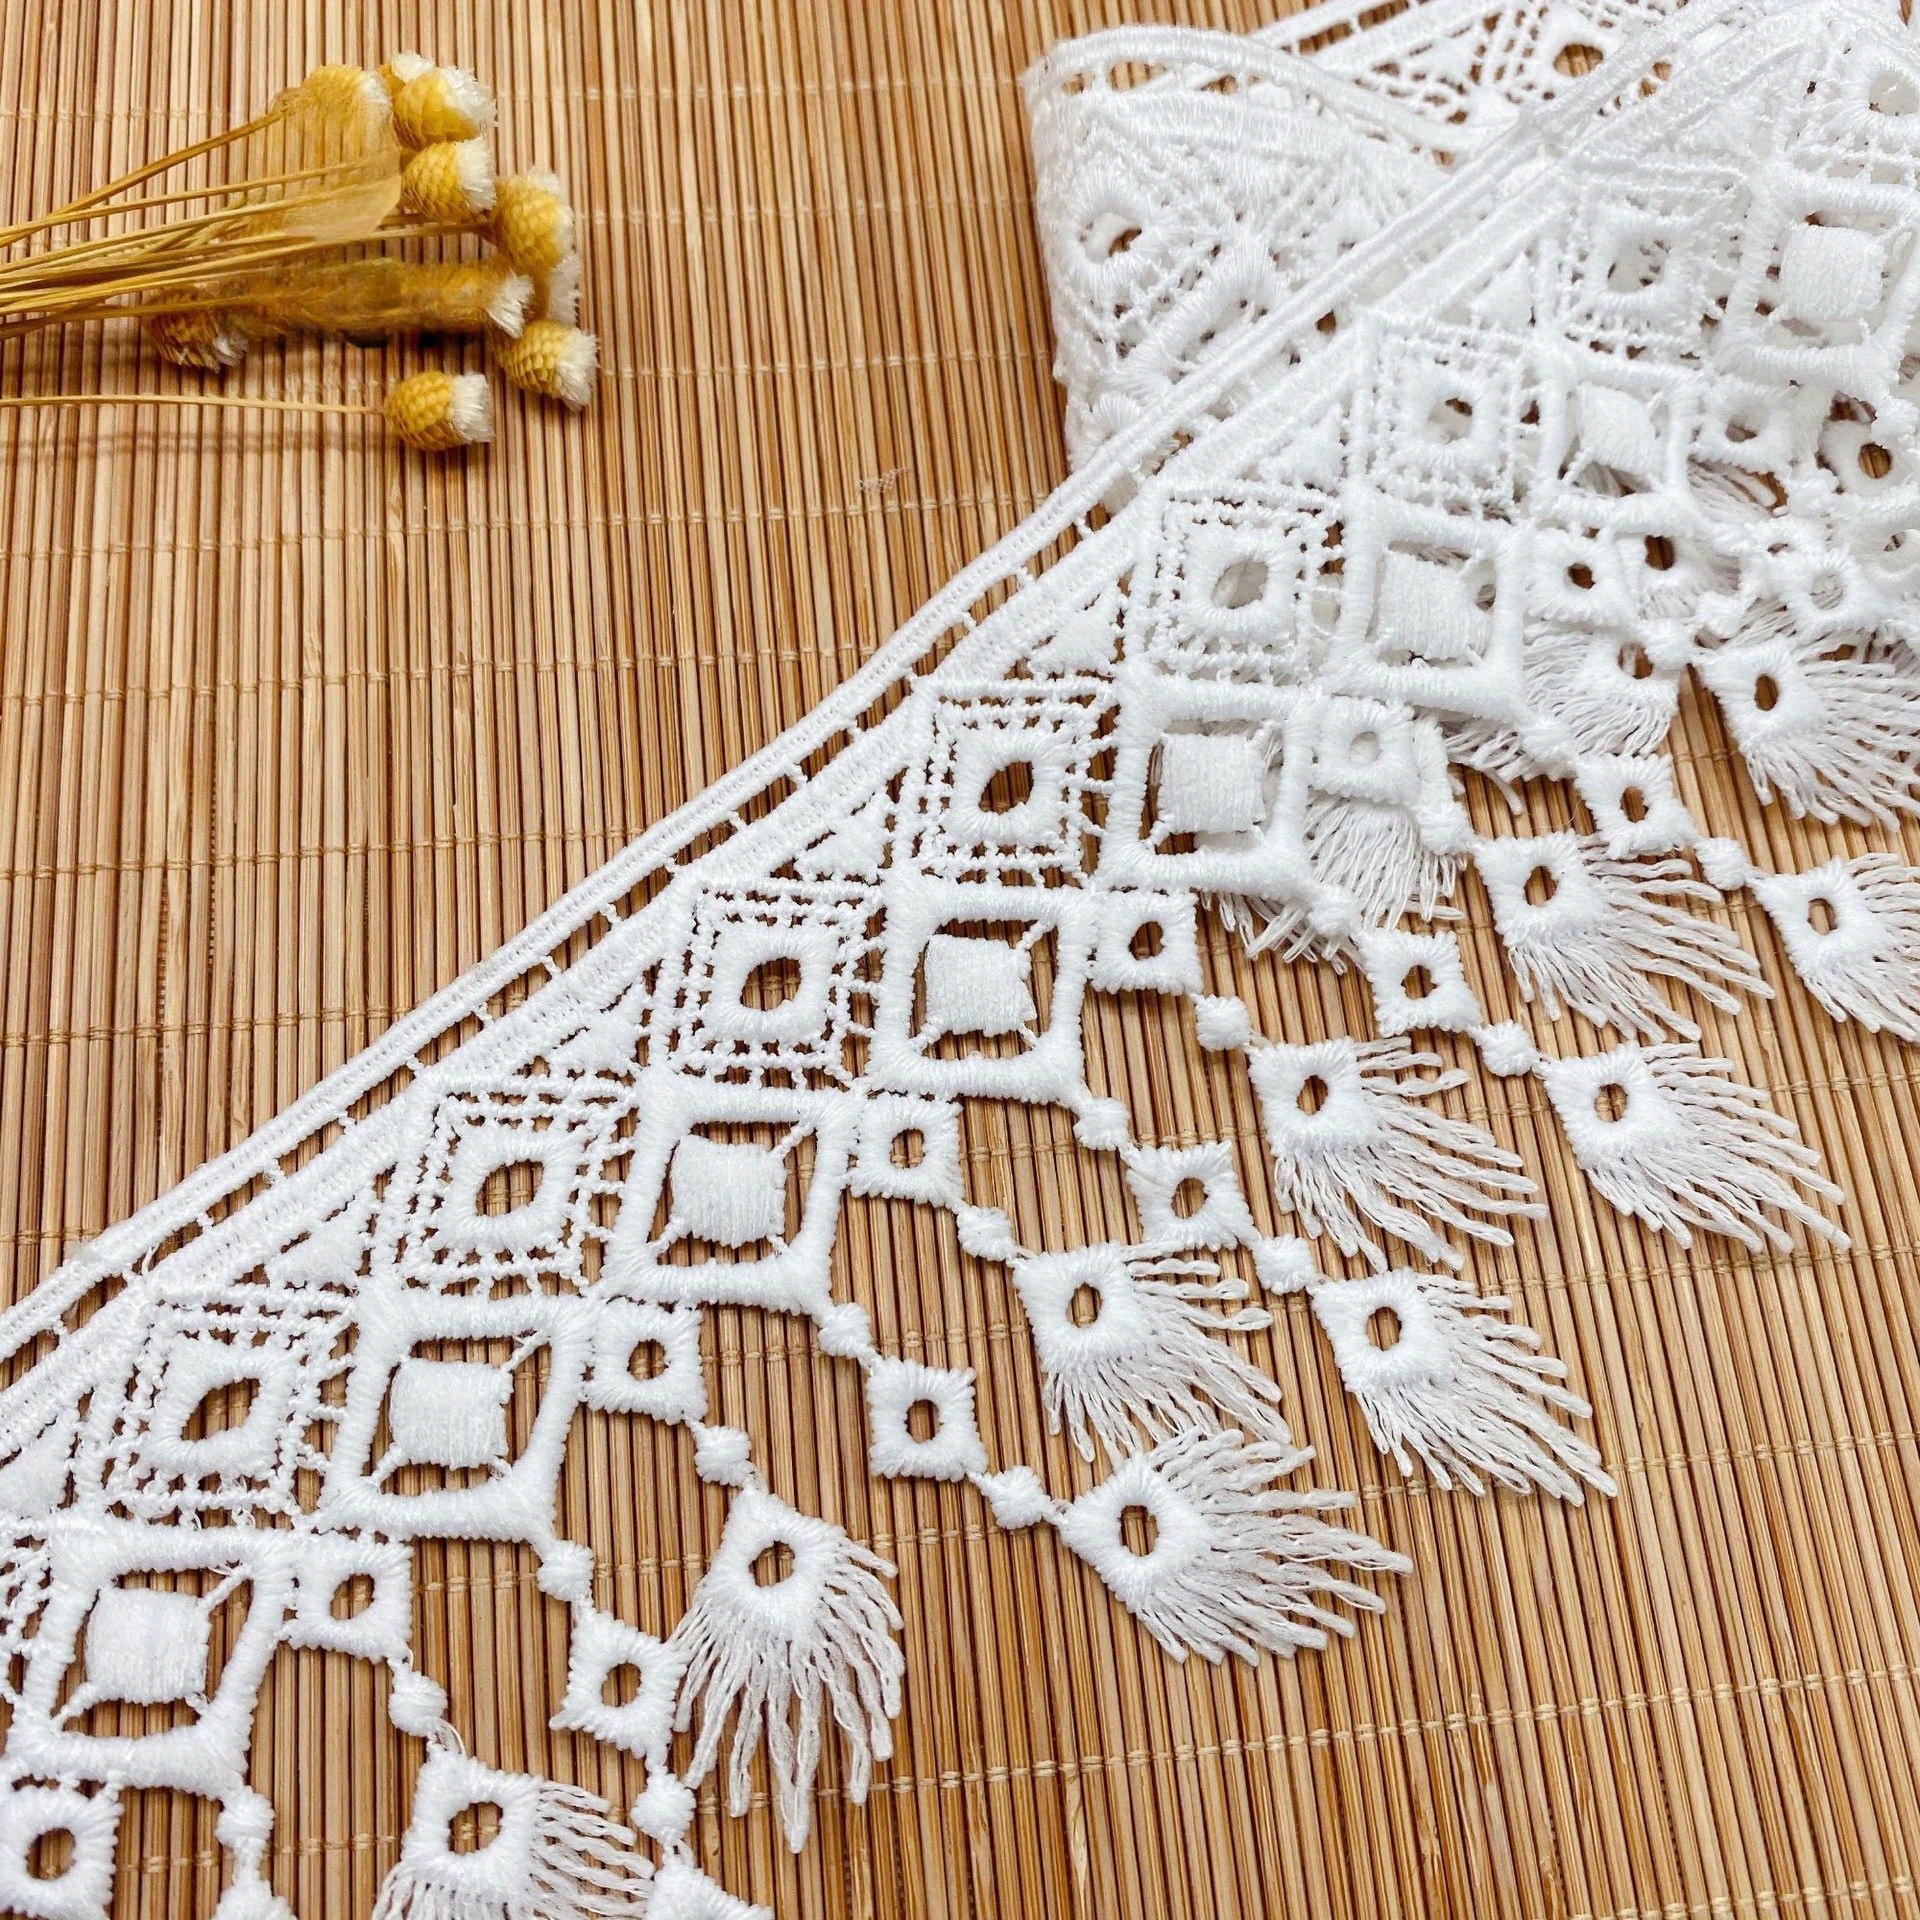 

5 Yards White Lace Fringe Trim, 9cm/3.5inch Water-soluble Embroidery Lace For Diy Clothing And Curtain Accessories Decor